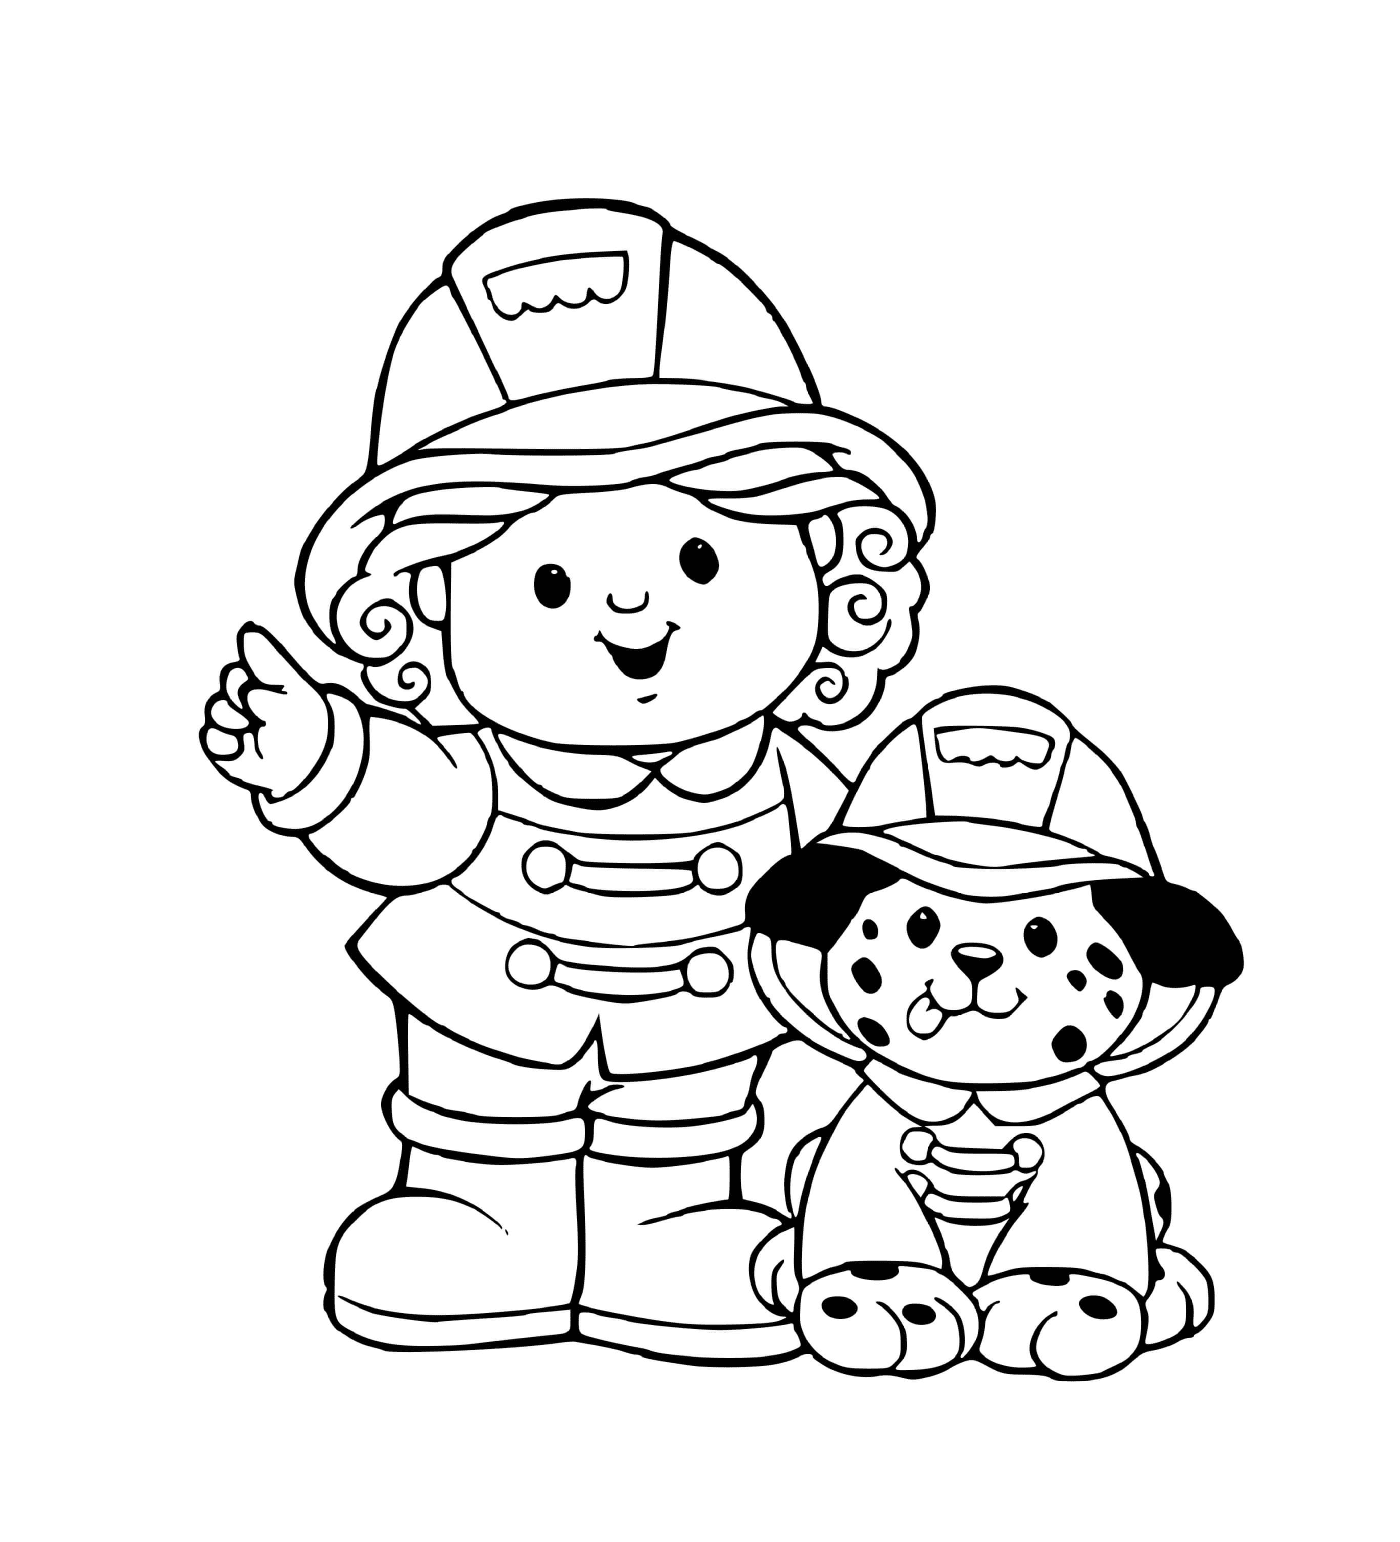  Firefighter woman with her dog 